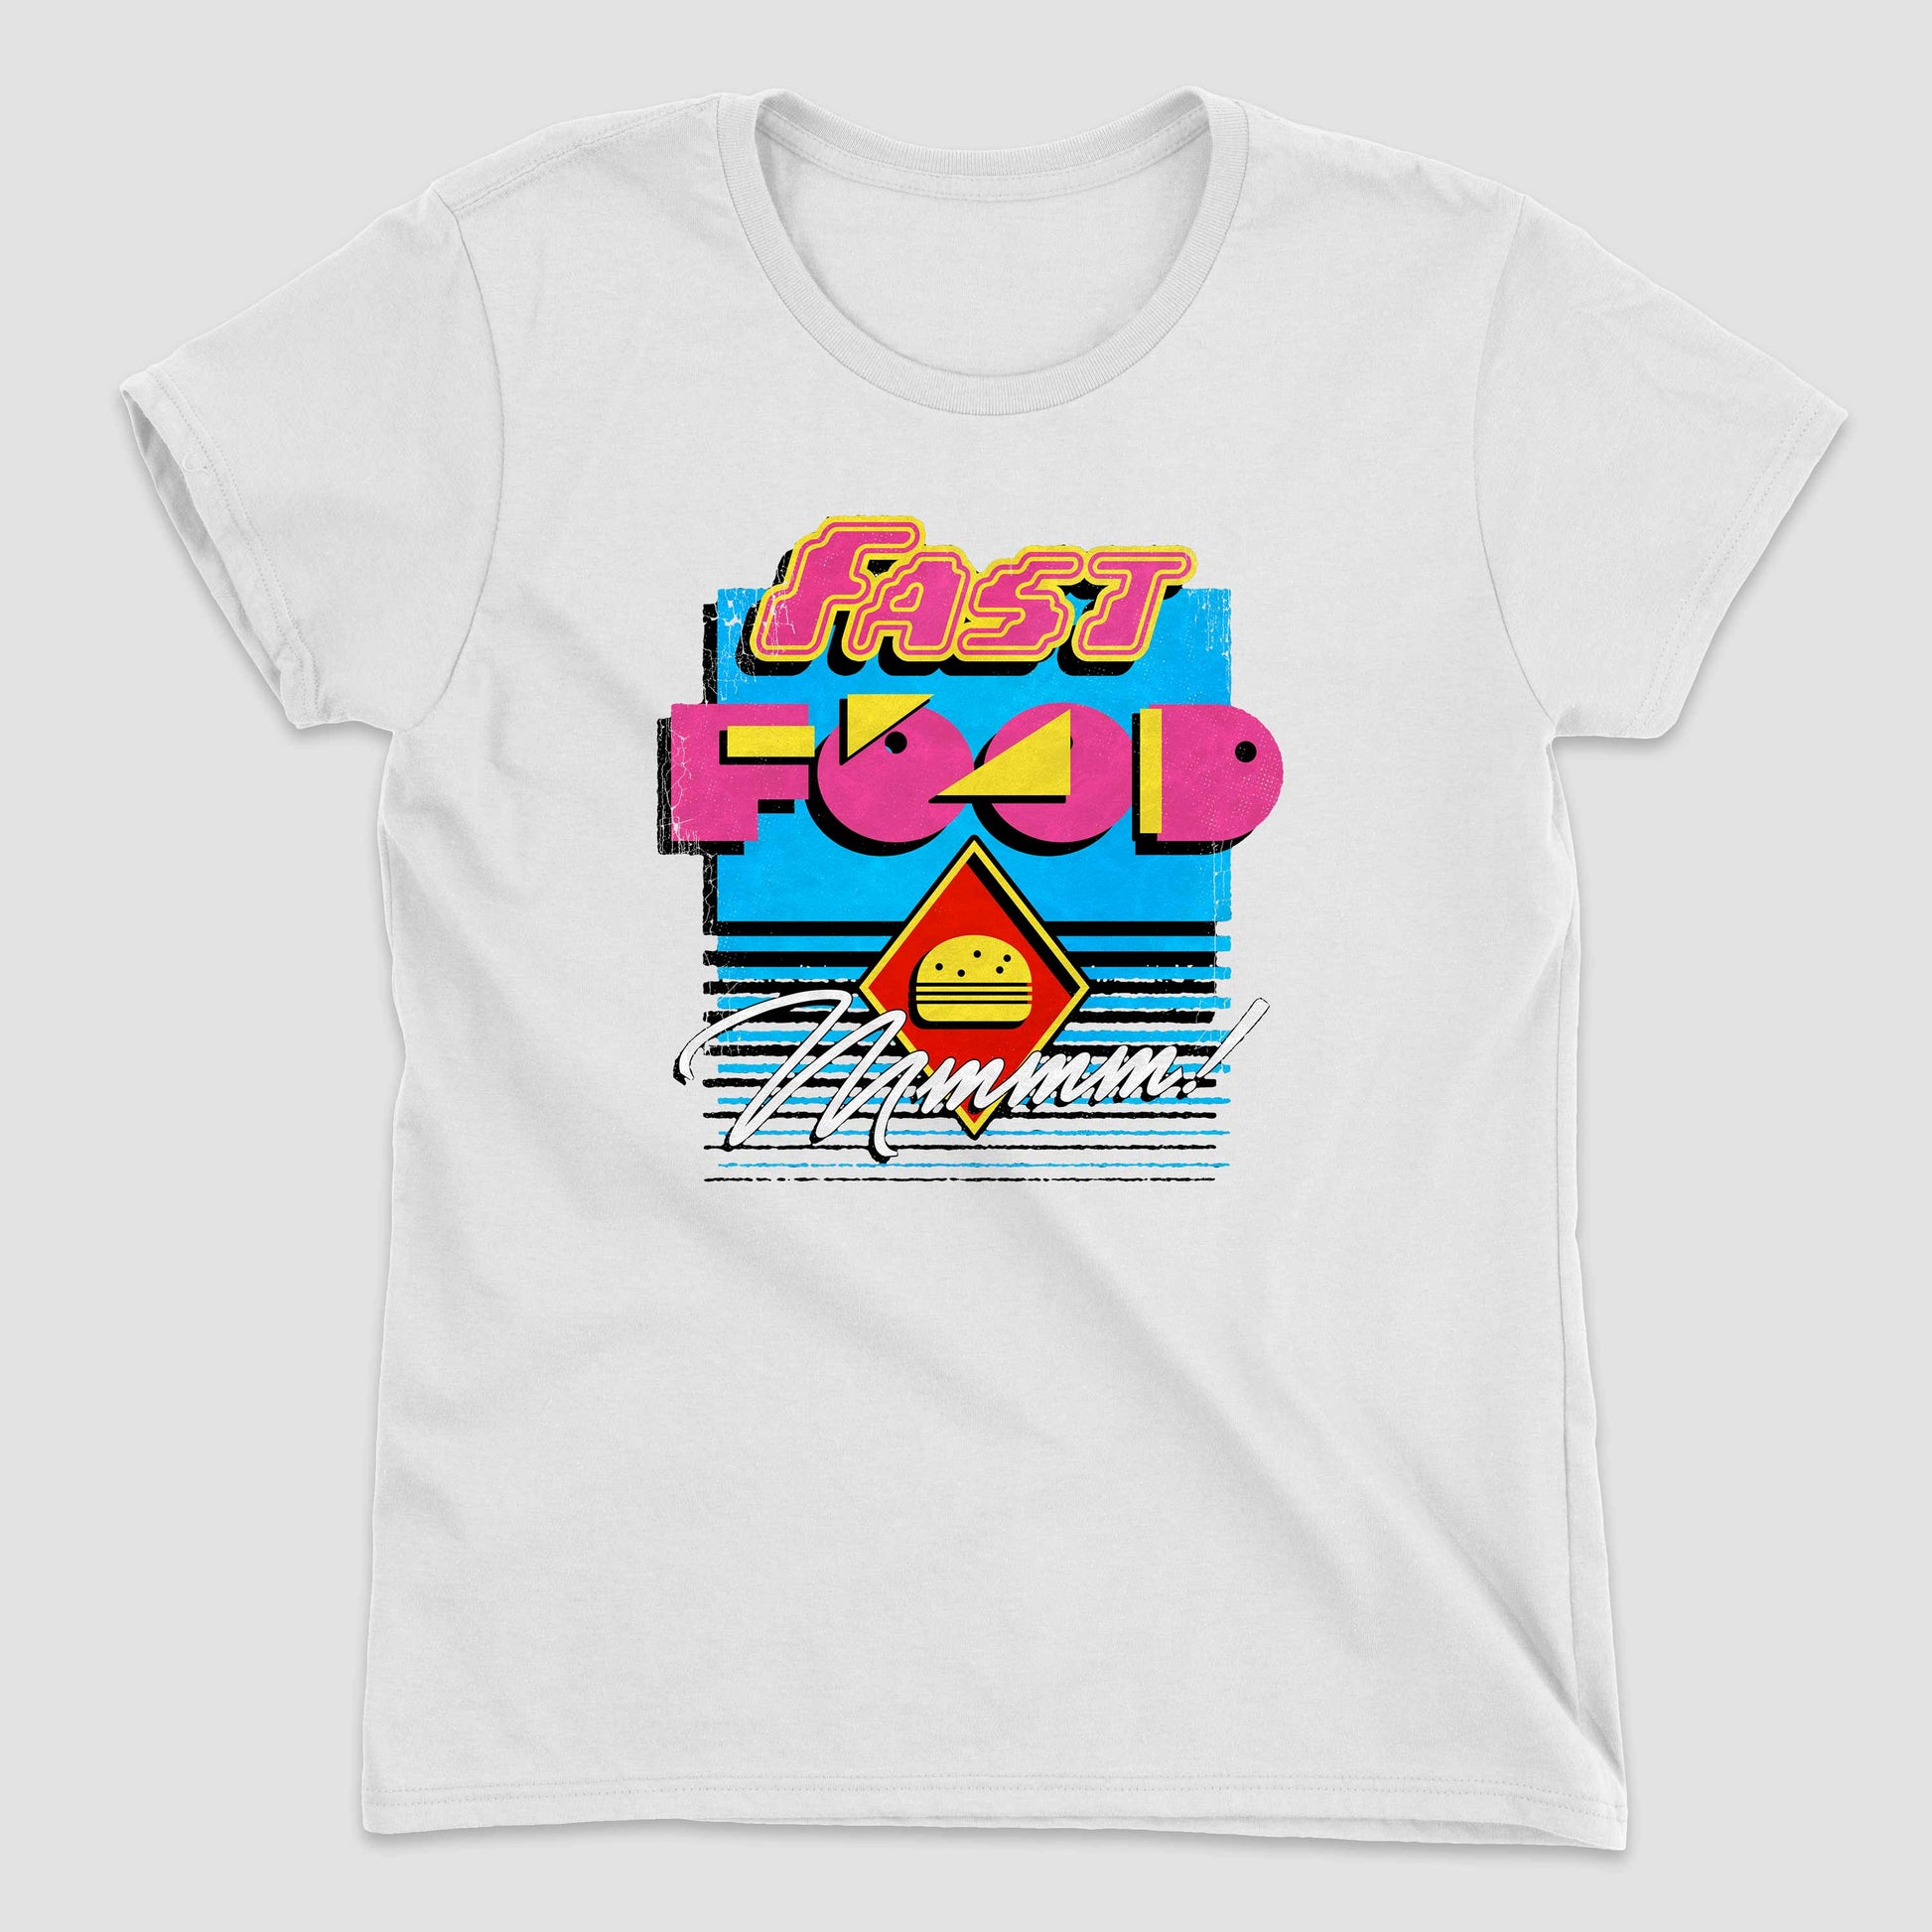 White 90s Fast Food Women's Graphic T-Shirt by Snaxtime